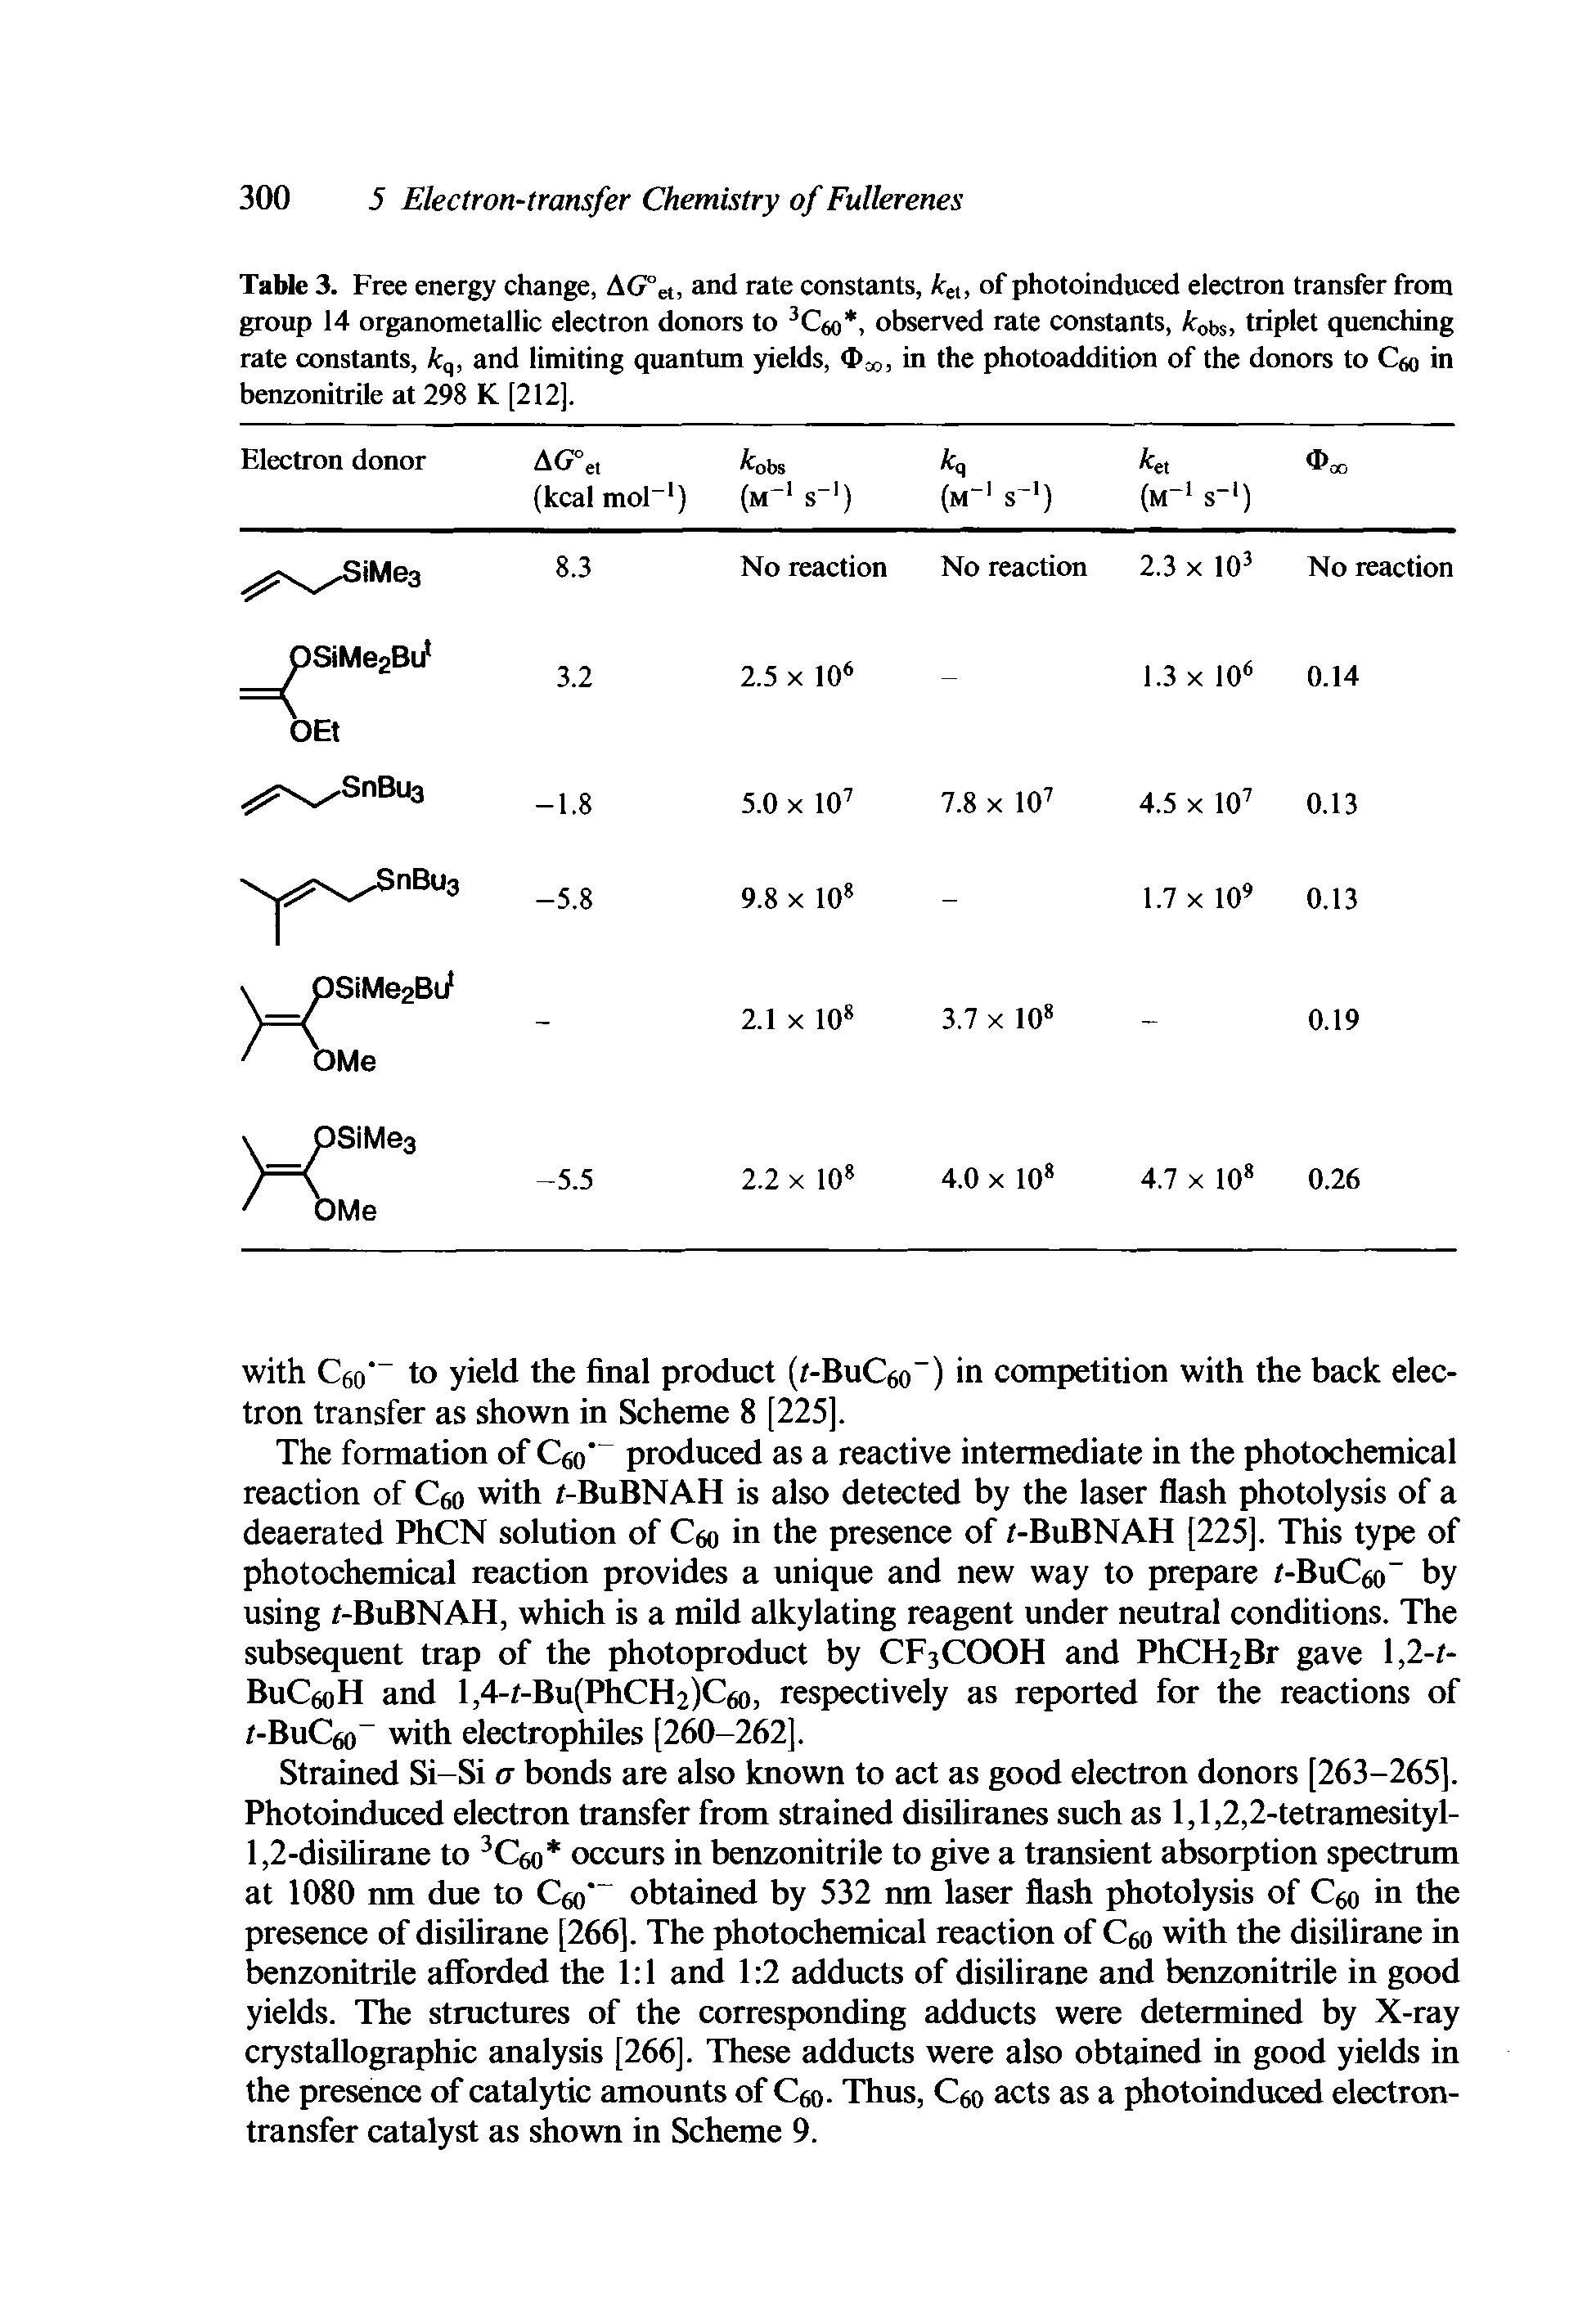 Table 3. Free energy change, AG°ct, and rate constants, of photoinduced electron transfer from group 14 organometallic electron donors to C, observed rate constants, obs, triplet quenching rate constants, kq, and limiting quantum yields, Oco, in the photoaddition of the donors to in benzonitrile at 298 K [212].